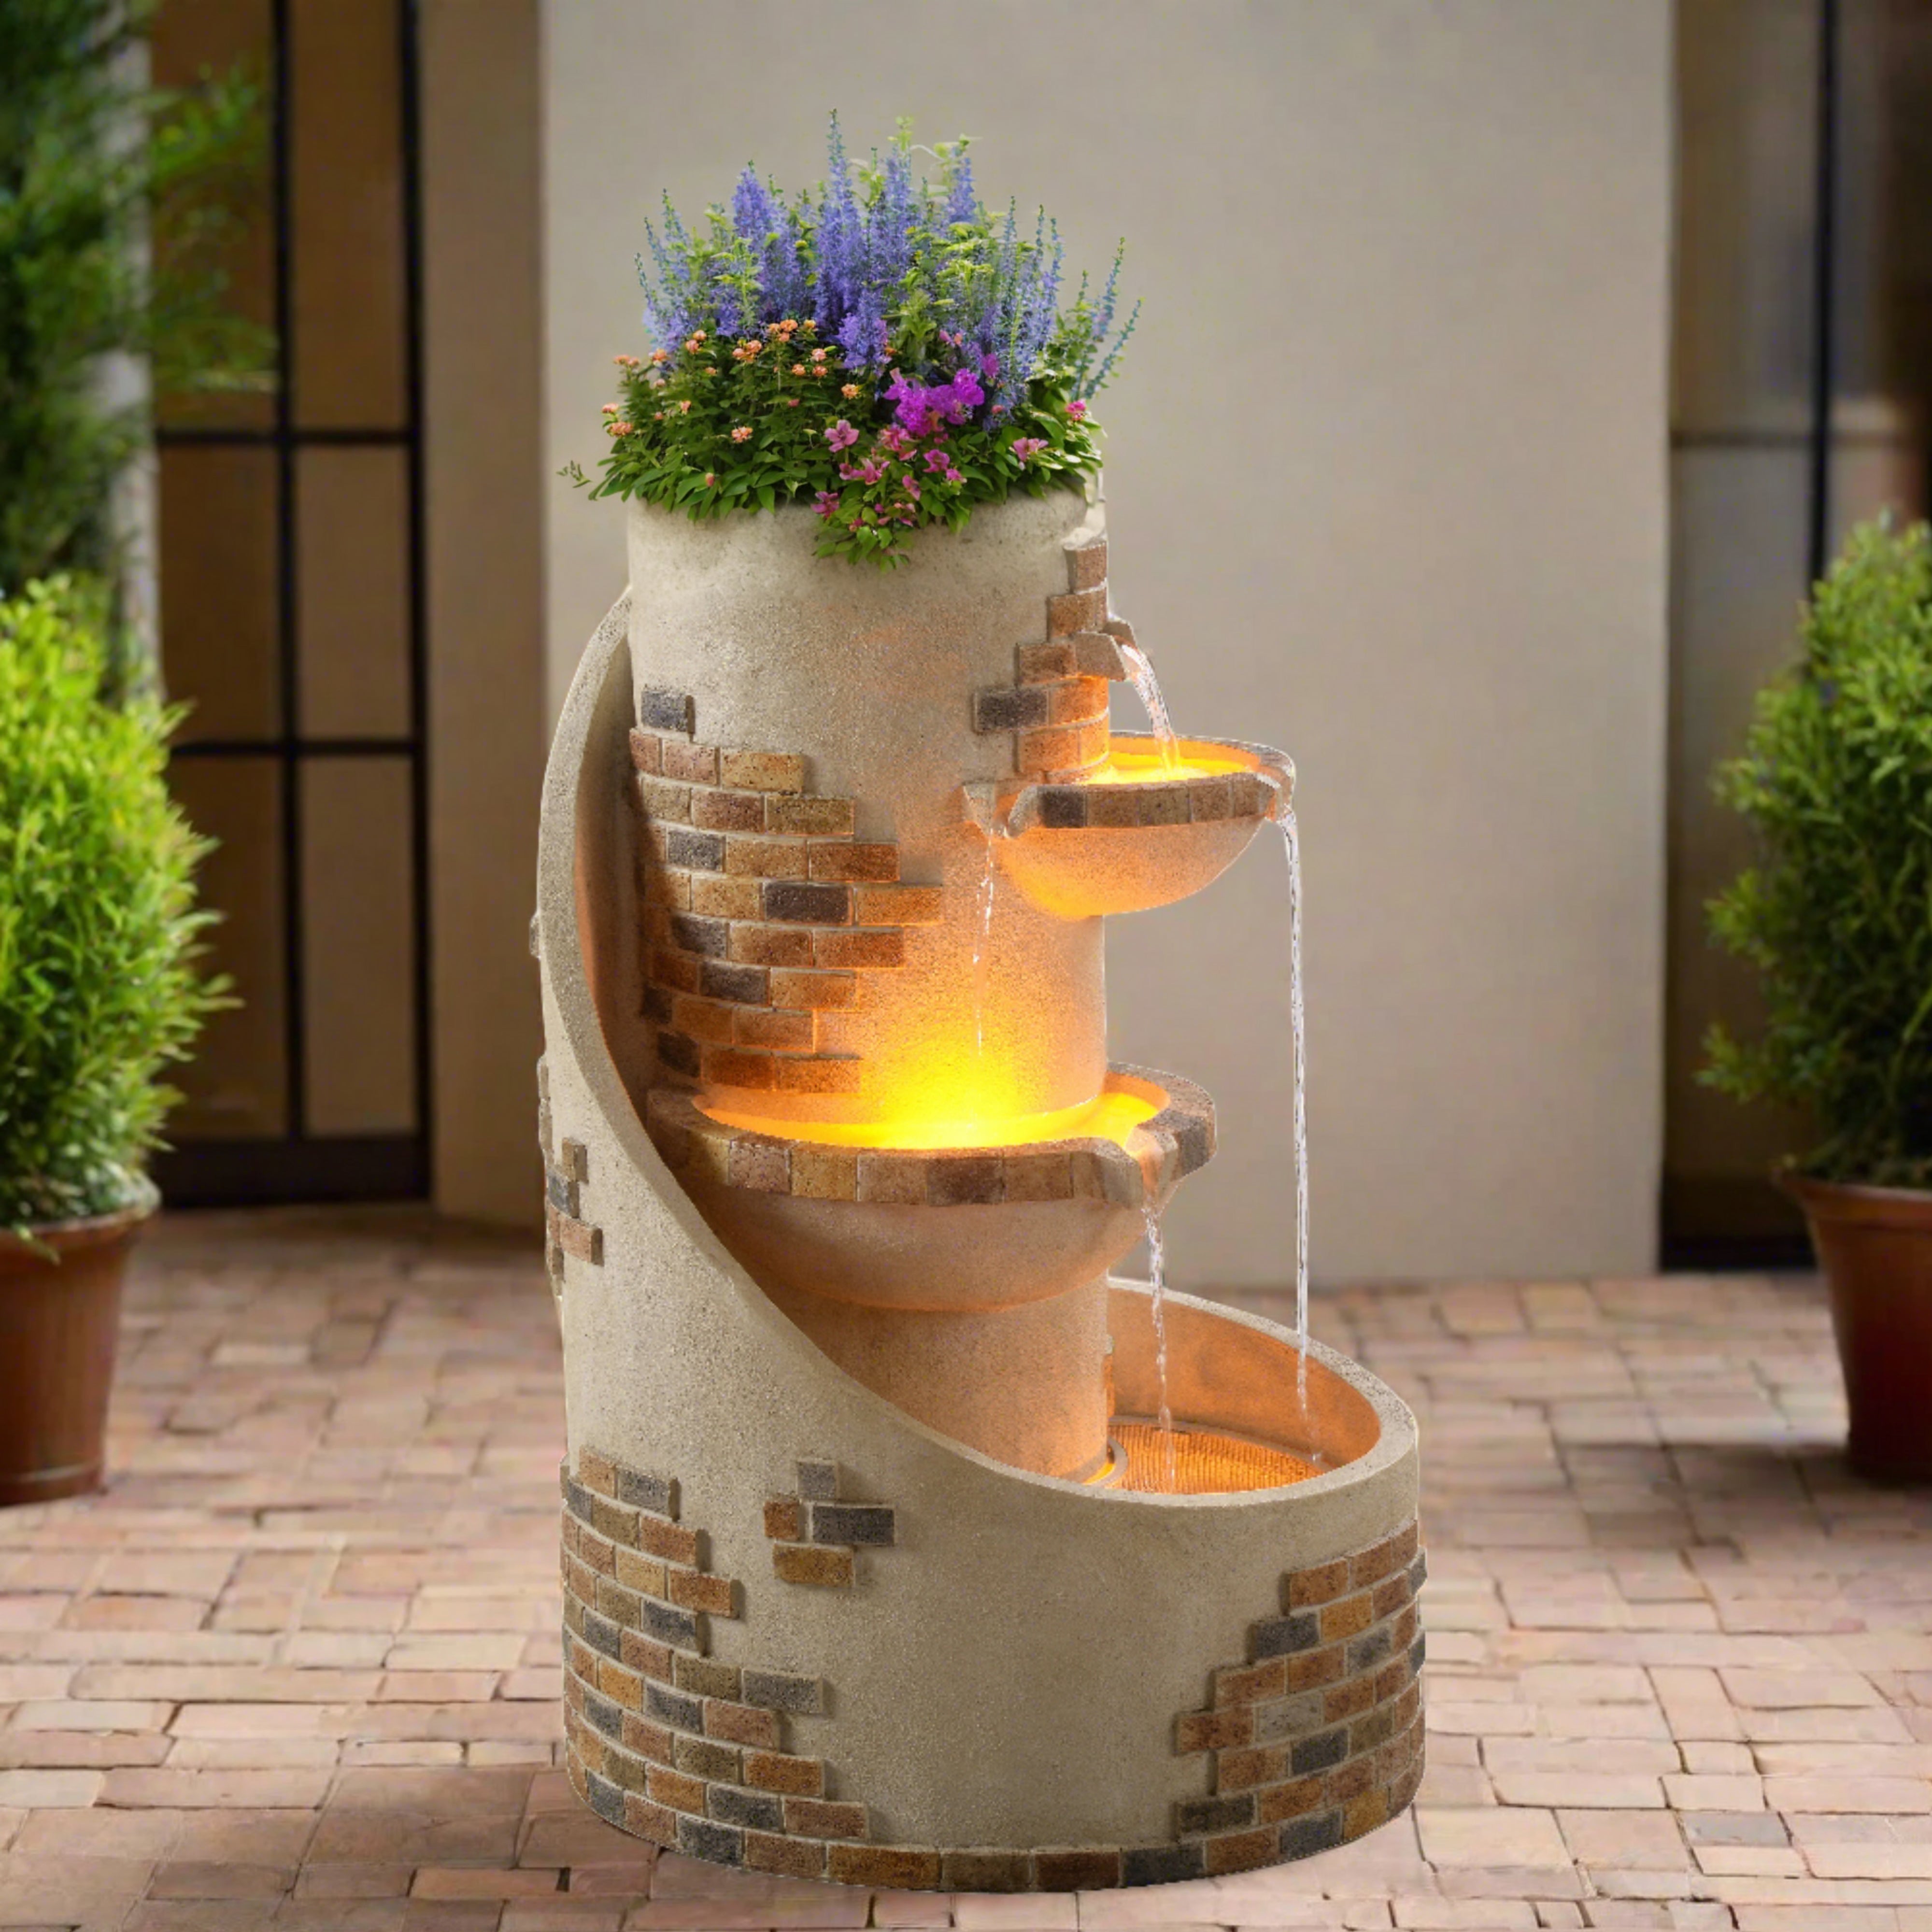 the exposed brick fountain with planter sits in a lush garden at dusk